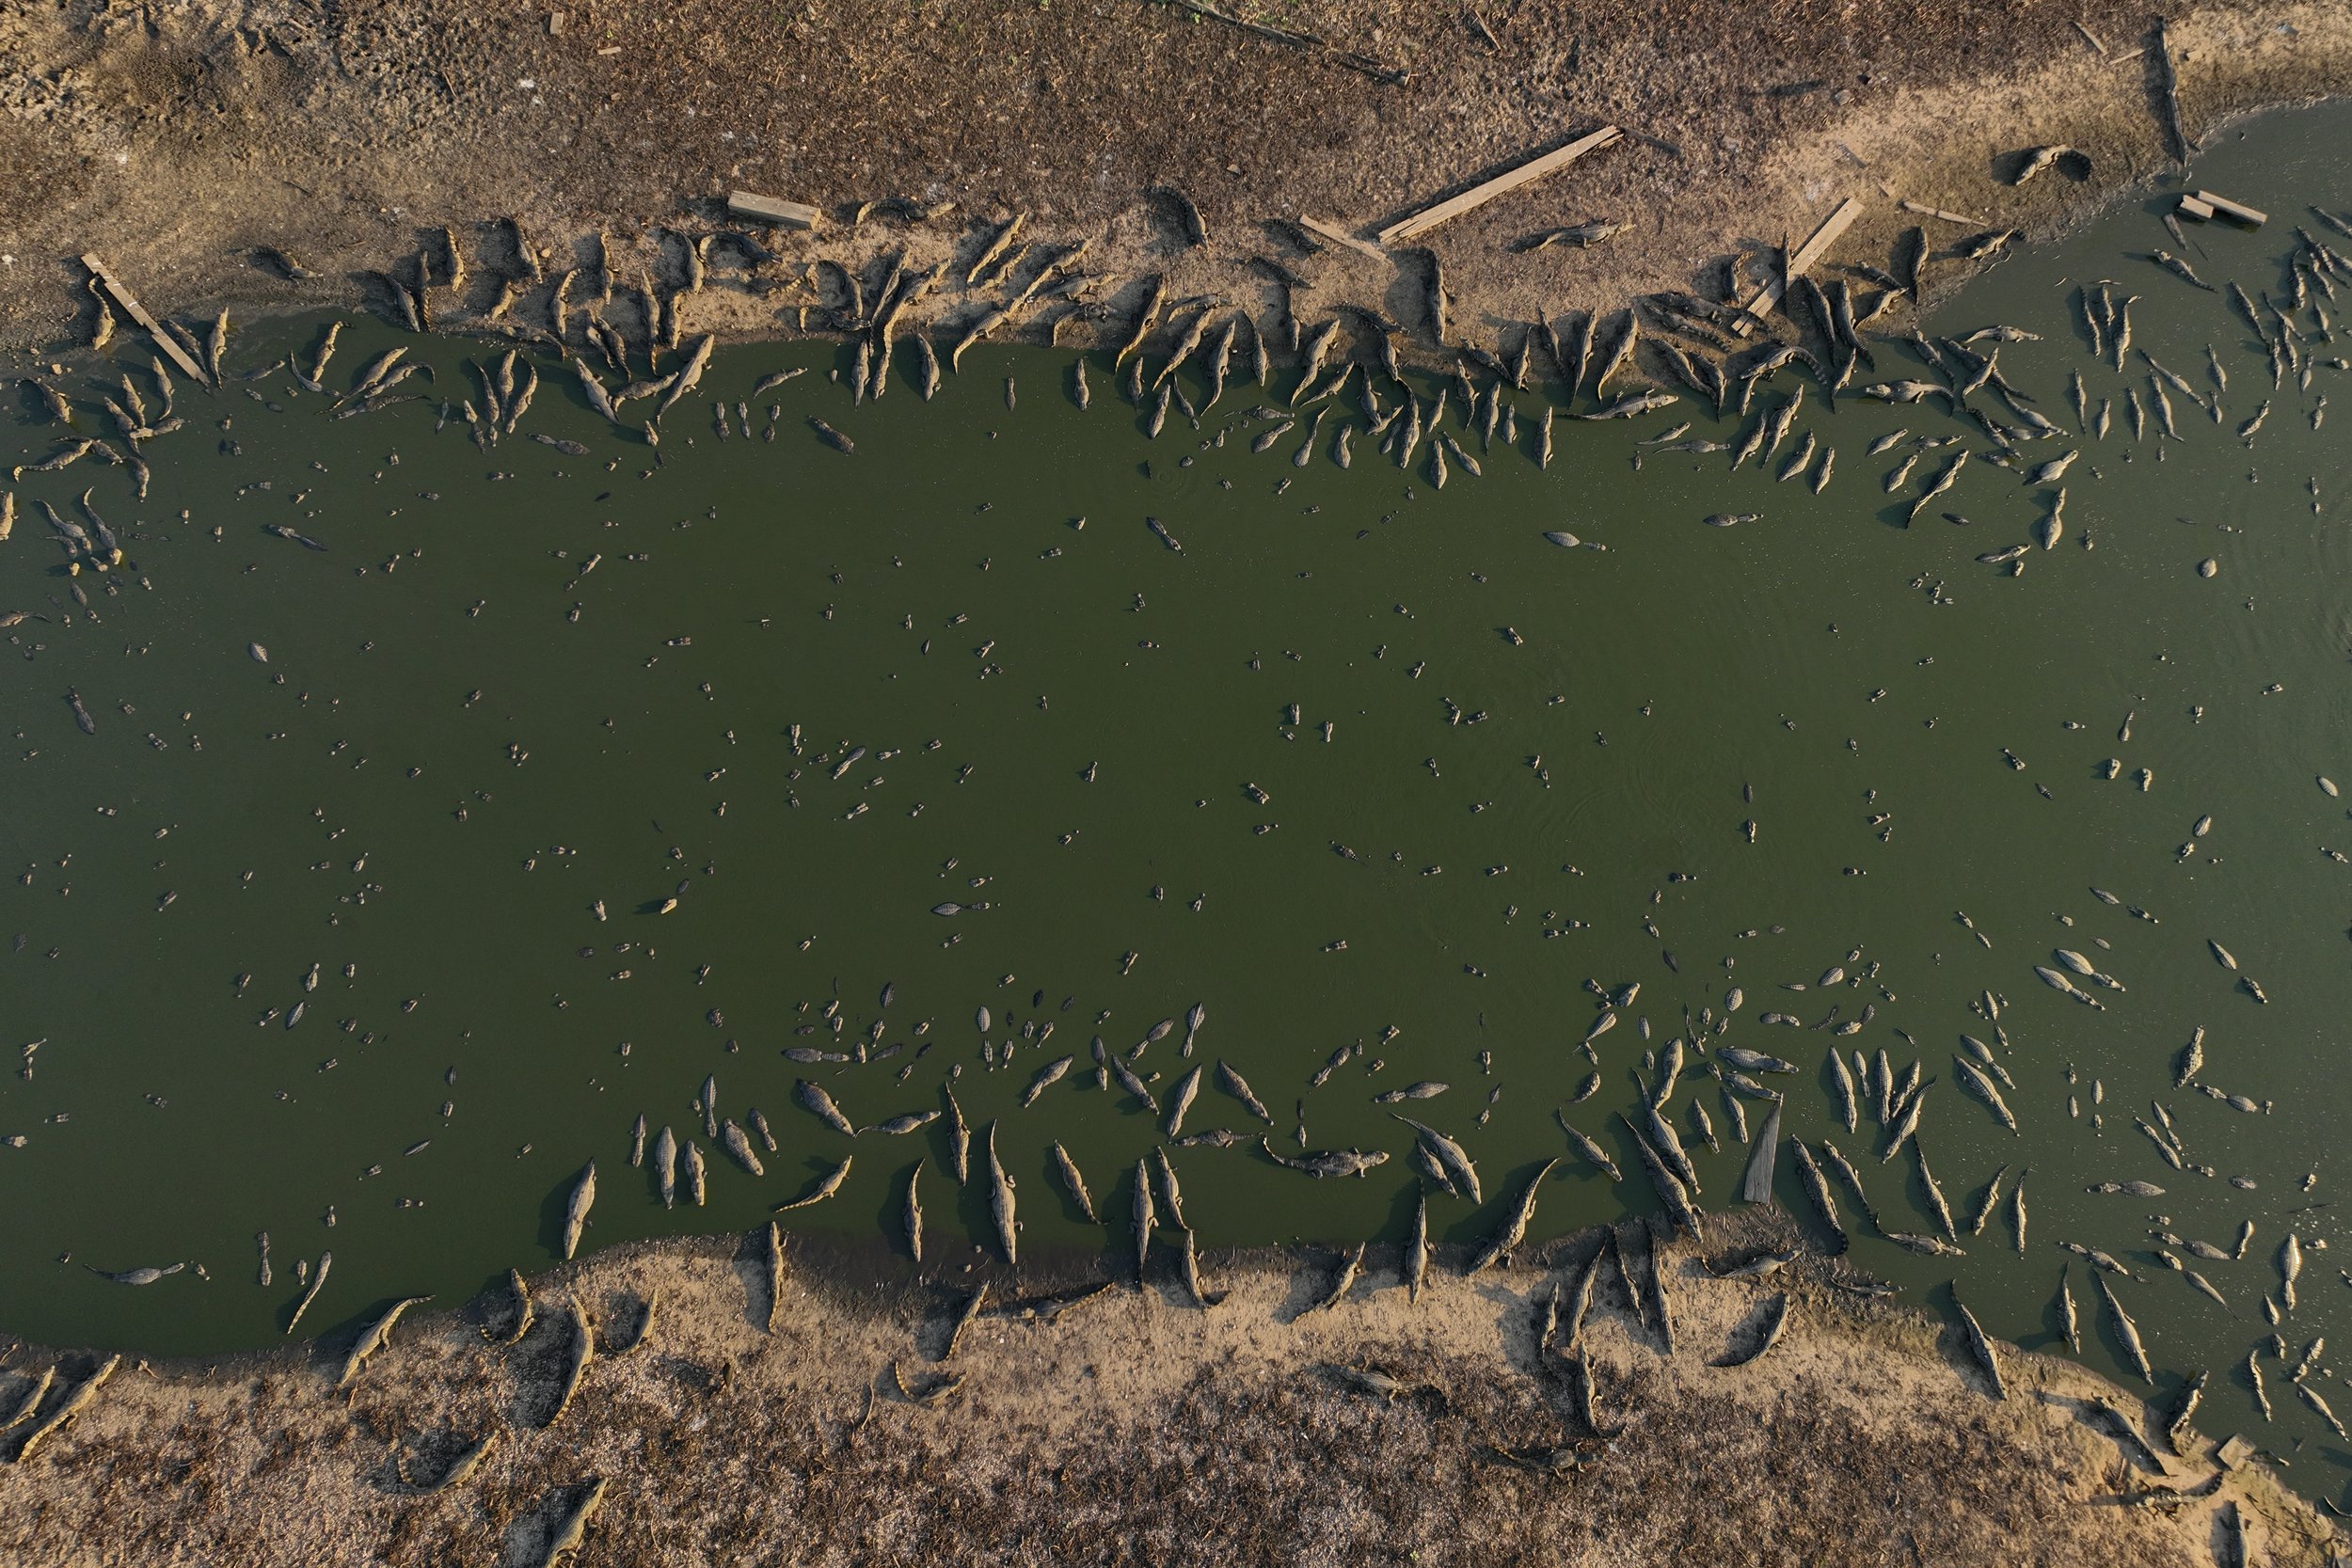  A group of caimans sit on the banks of the almost dried-up Bento Gomes River in the Pantanal wetlands near Pocone, Mato Grosso state, Brazil, on Nov. 15, 2023. (AP Photo/Andre Penner) 